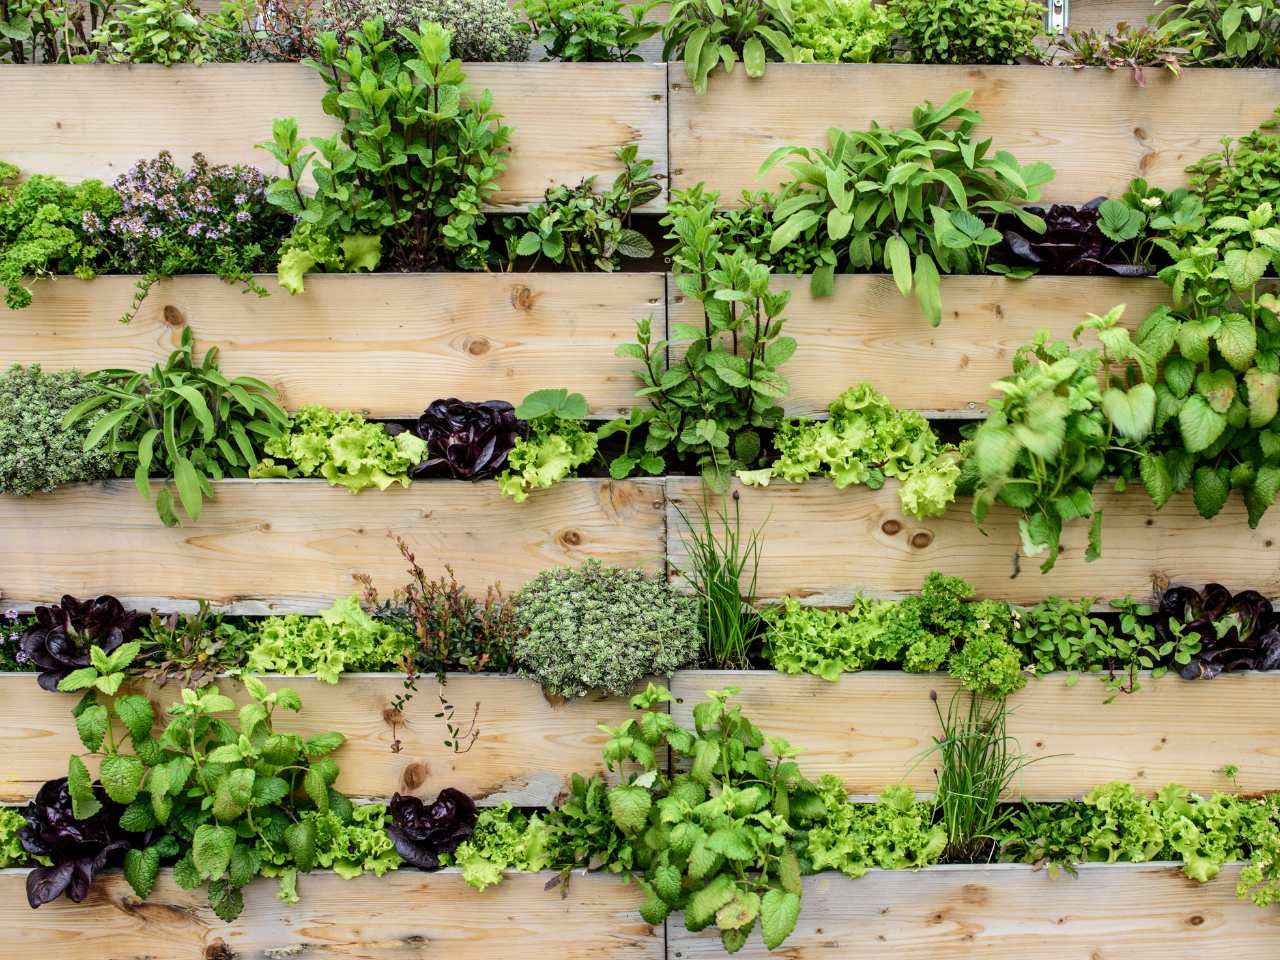 Top 5 Proven Vertical Garden Ideas & Container Hacks for Limited Space